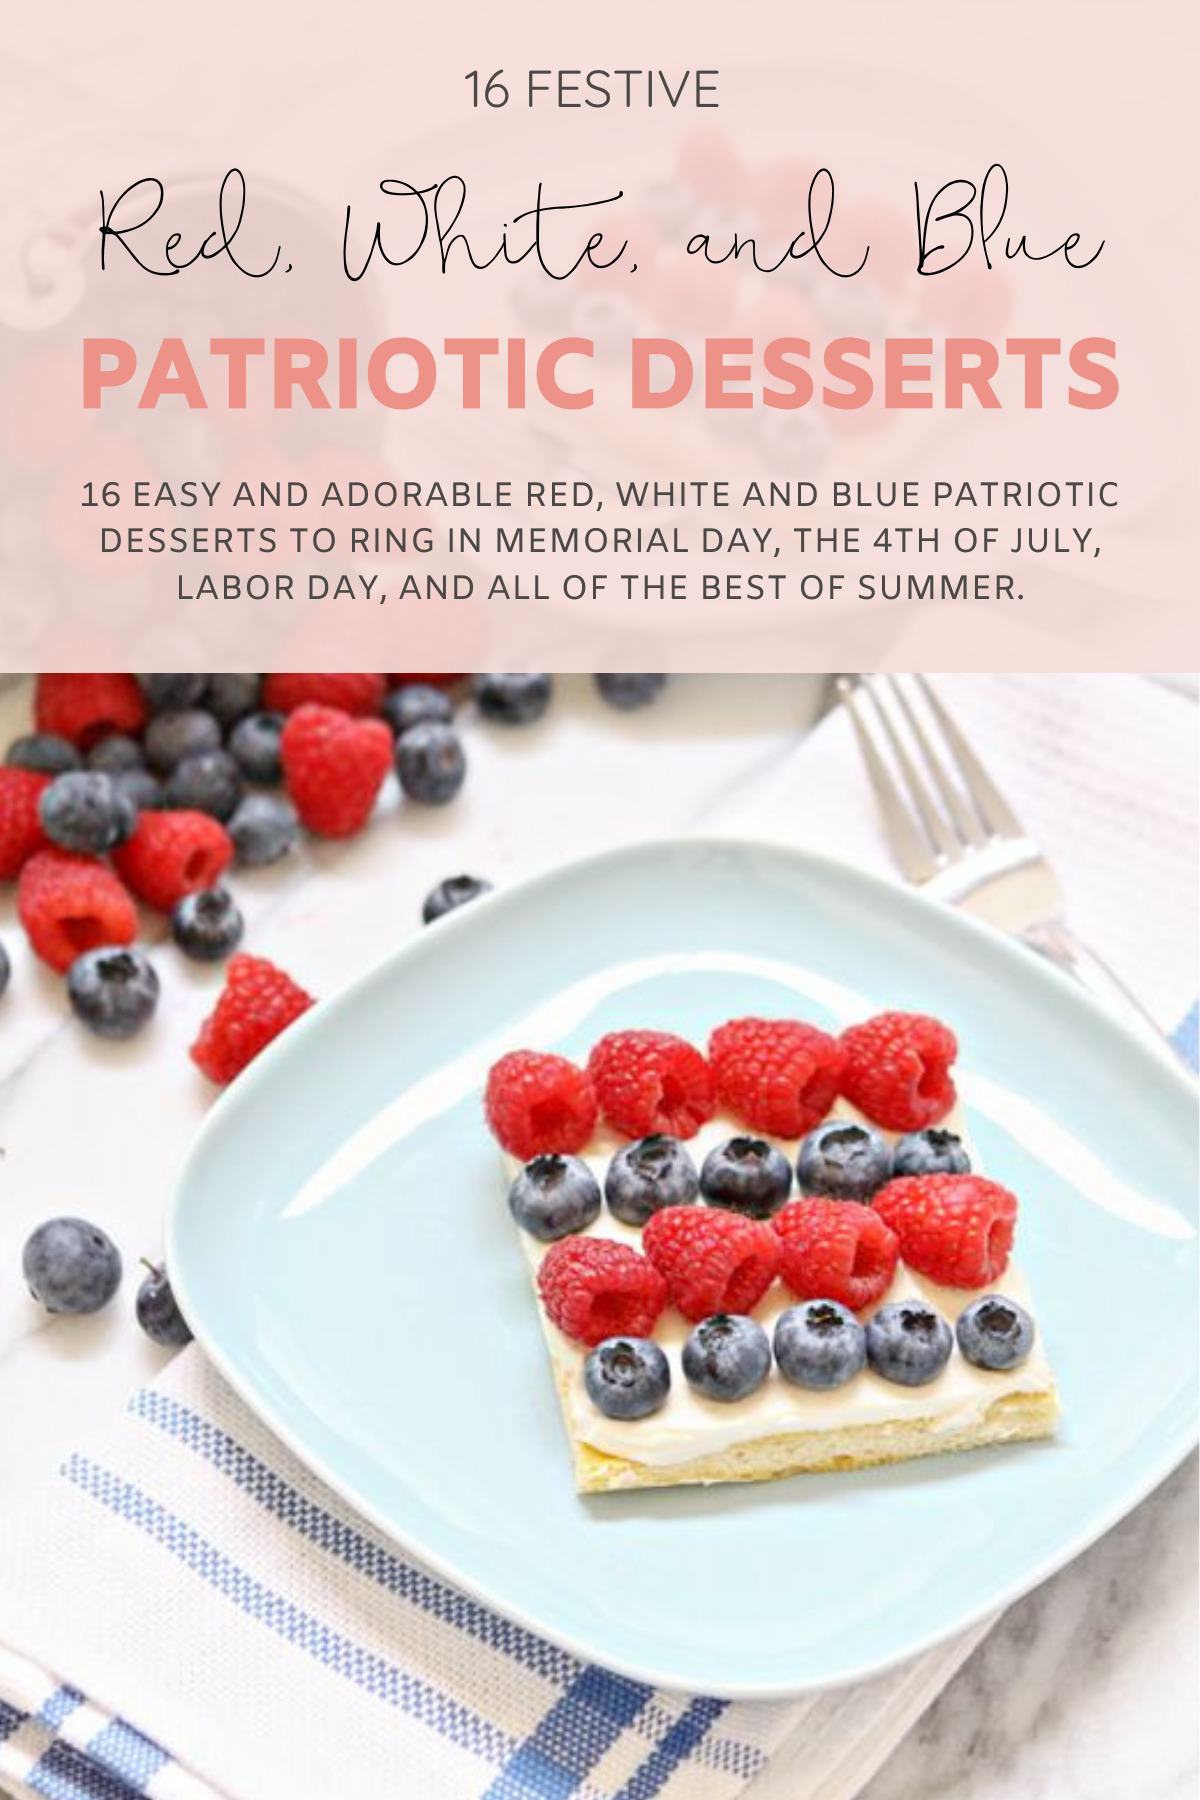 16 easy and adorable Red, White and Blue Patriotic Recipes ... the best festive food, treats, drinks, and more, to ring in Memorial Day, the 4th of July, and all of the best of summer. | Red, White, and Blue Dessert Mini Fruit Pizzas | @glitterinclexi | GLITTERINC.COM